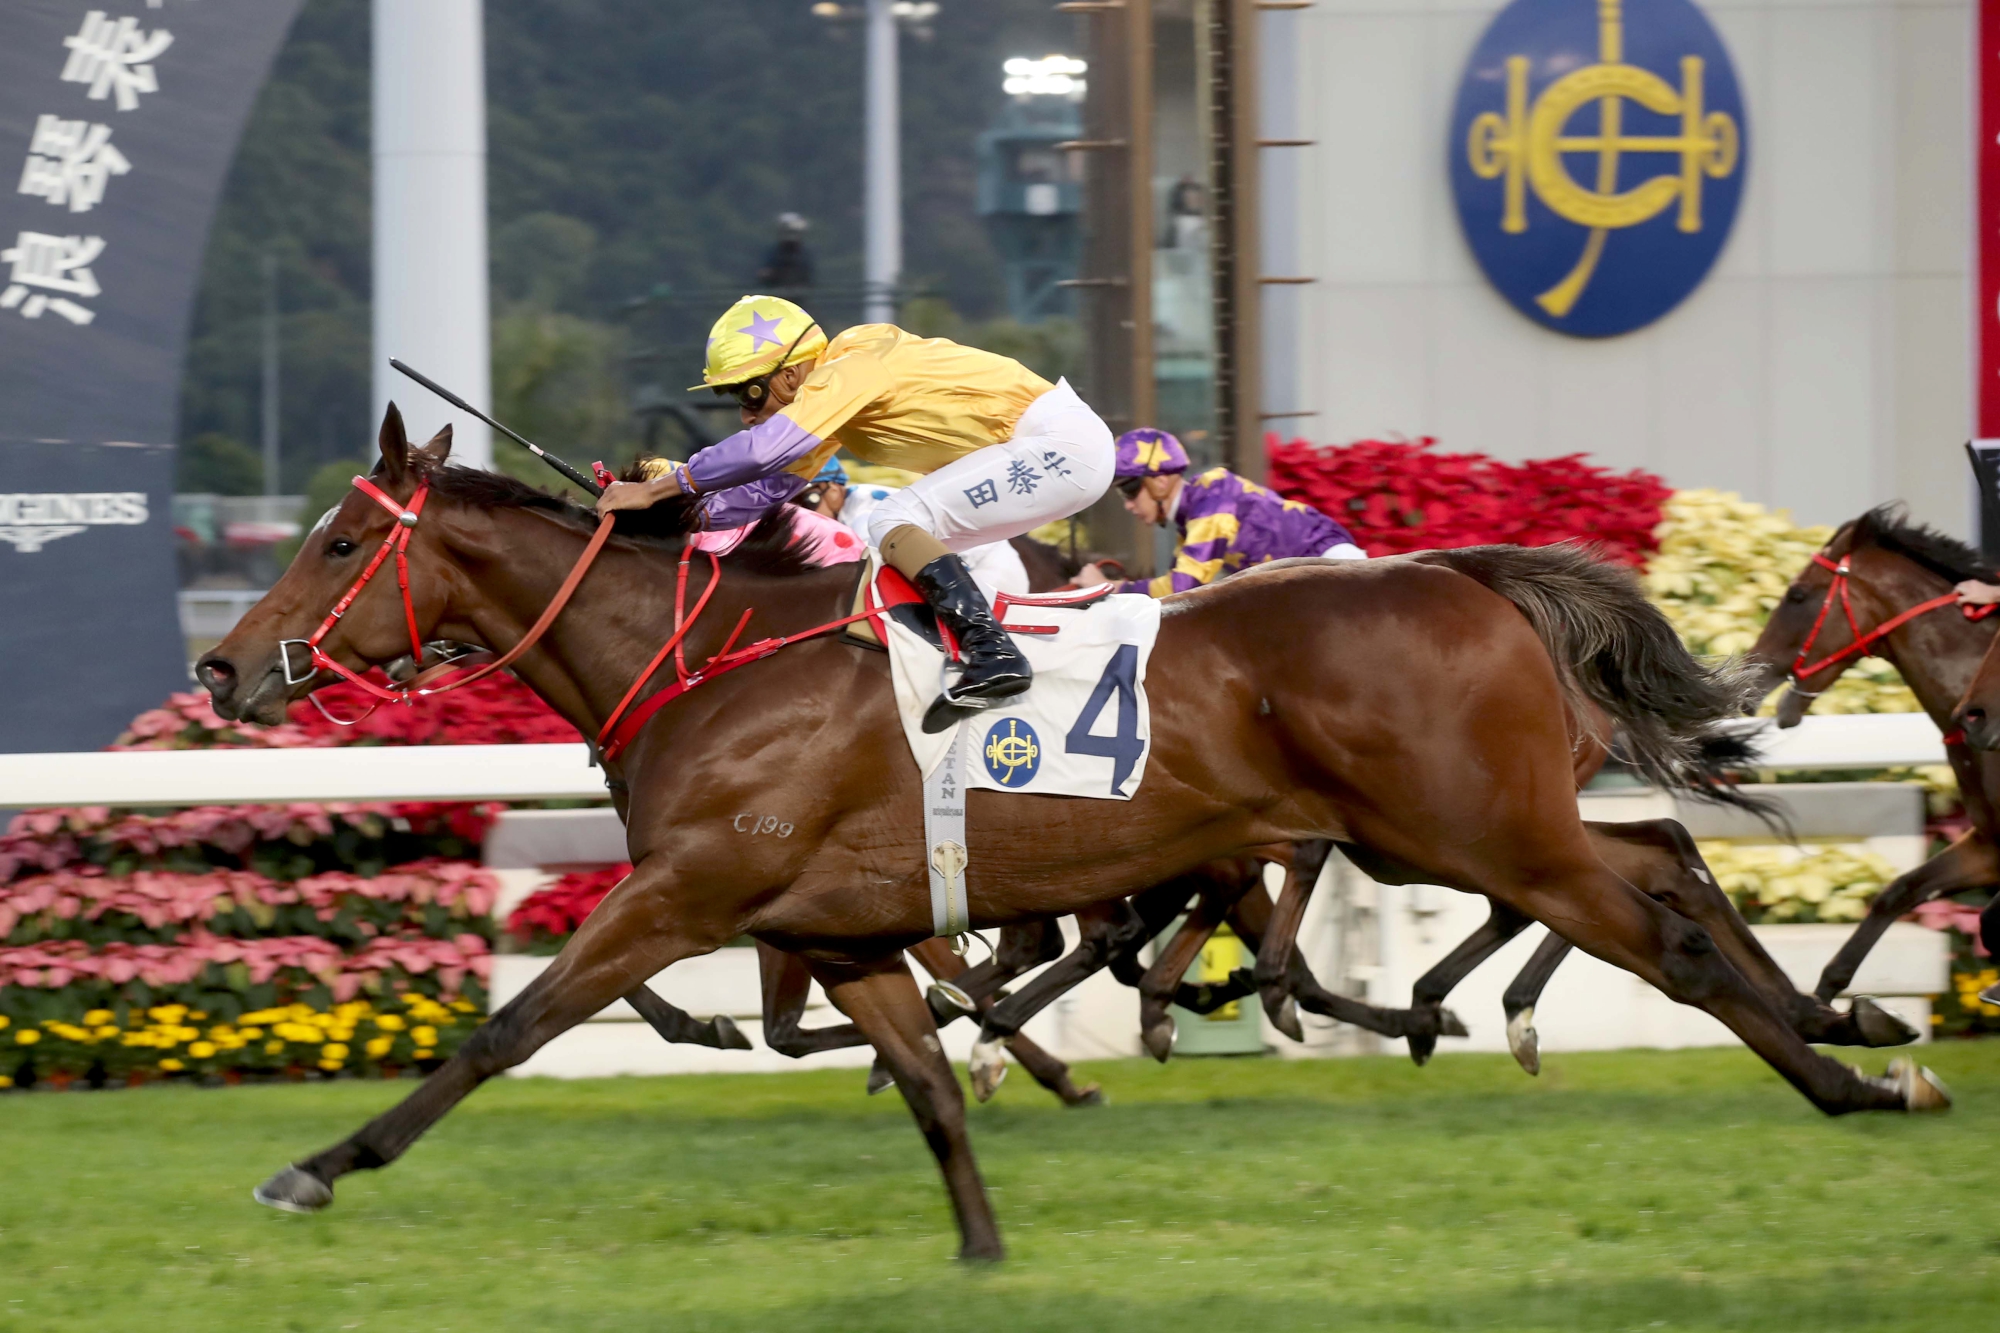 More Than This - HK : One-time BMW Hong Kong Derby hopeful who on the big day managed third; four-time winner who finished fifth to Southern Legend in G1 FWD Champions Mile.